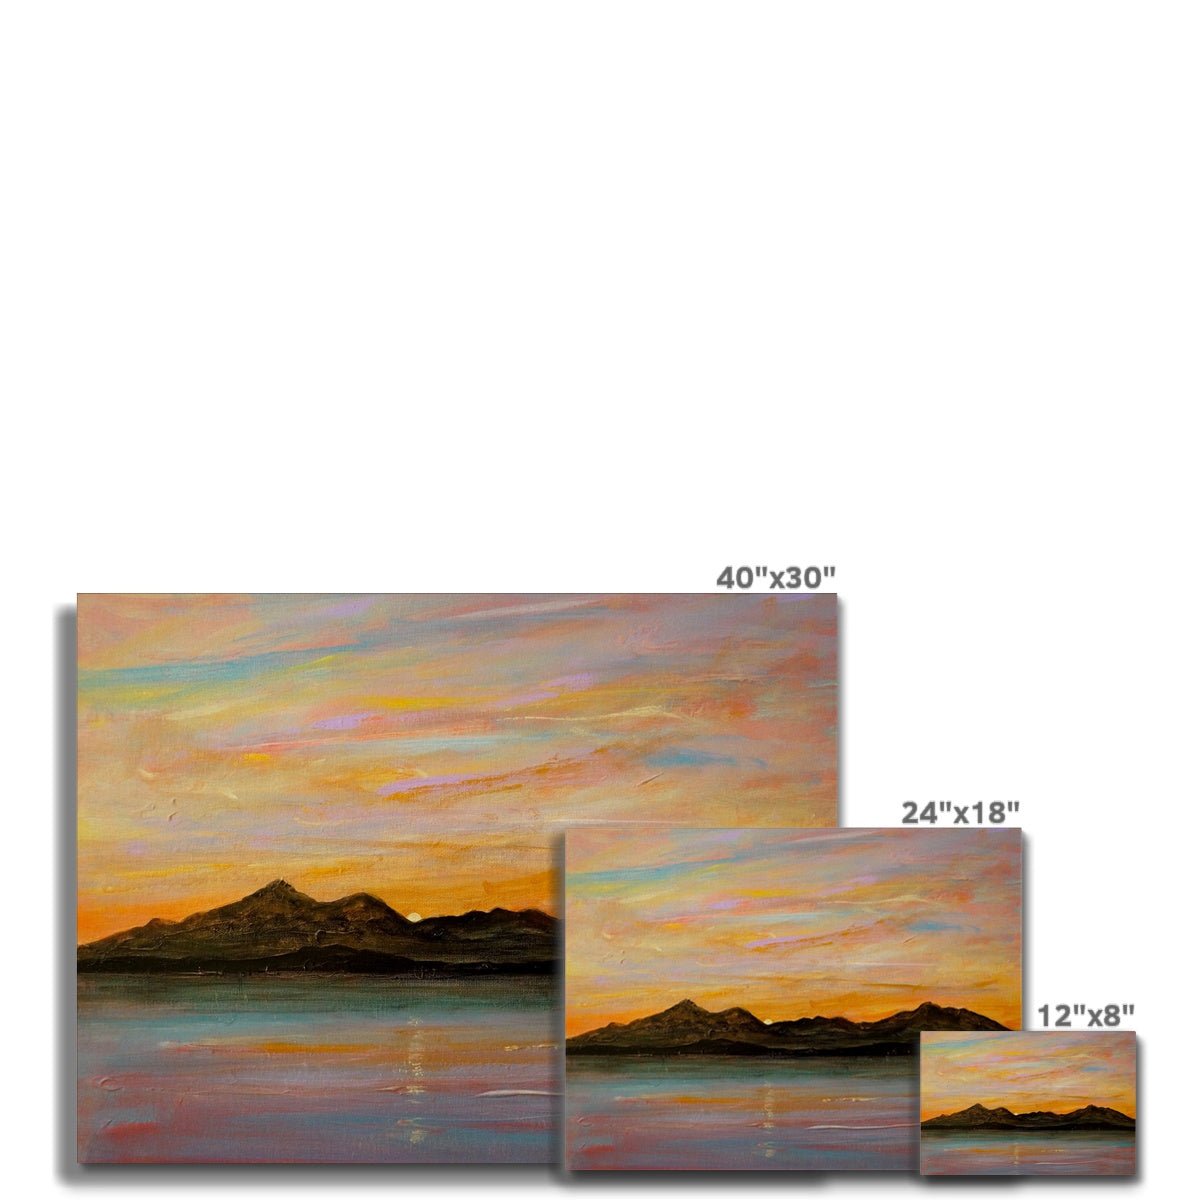 The Sleeping Warrior Arran Painting | Canvas From Scotland-Contemporary Stretched Canvas Prints-Arran Art Gallery-Paintings, Prints, Homeware, Art Gifts From Scotland By Scottish Artist Kevin Hunter